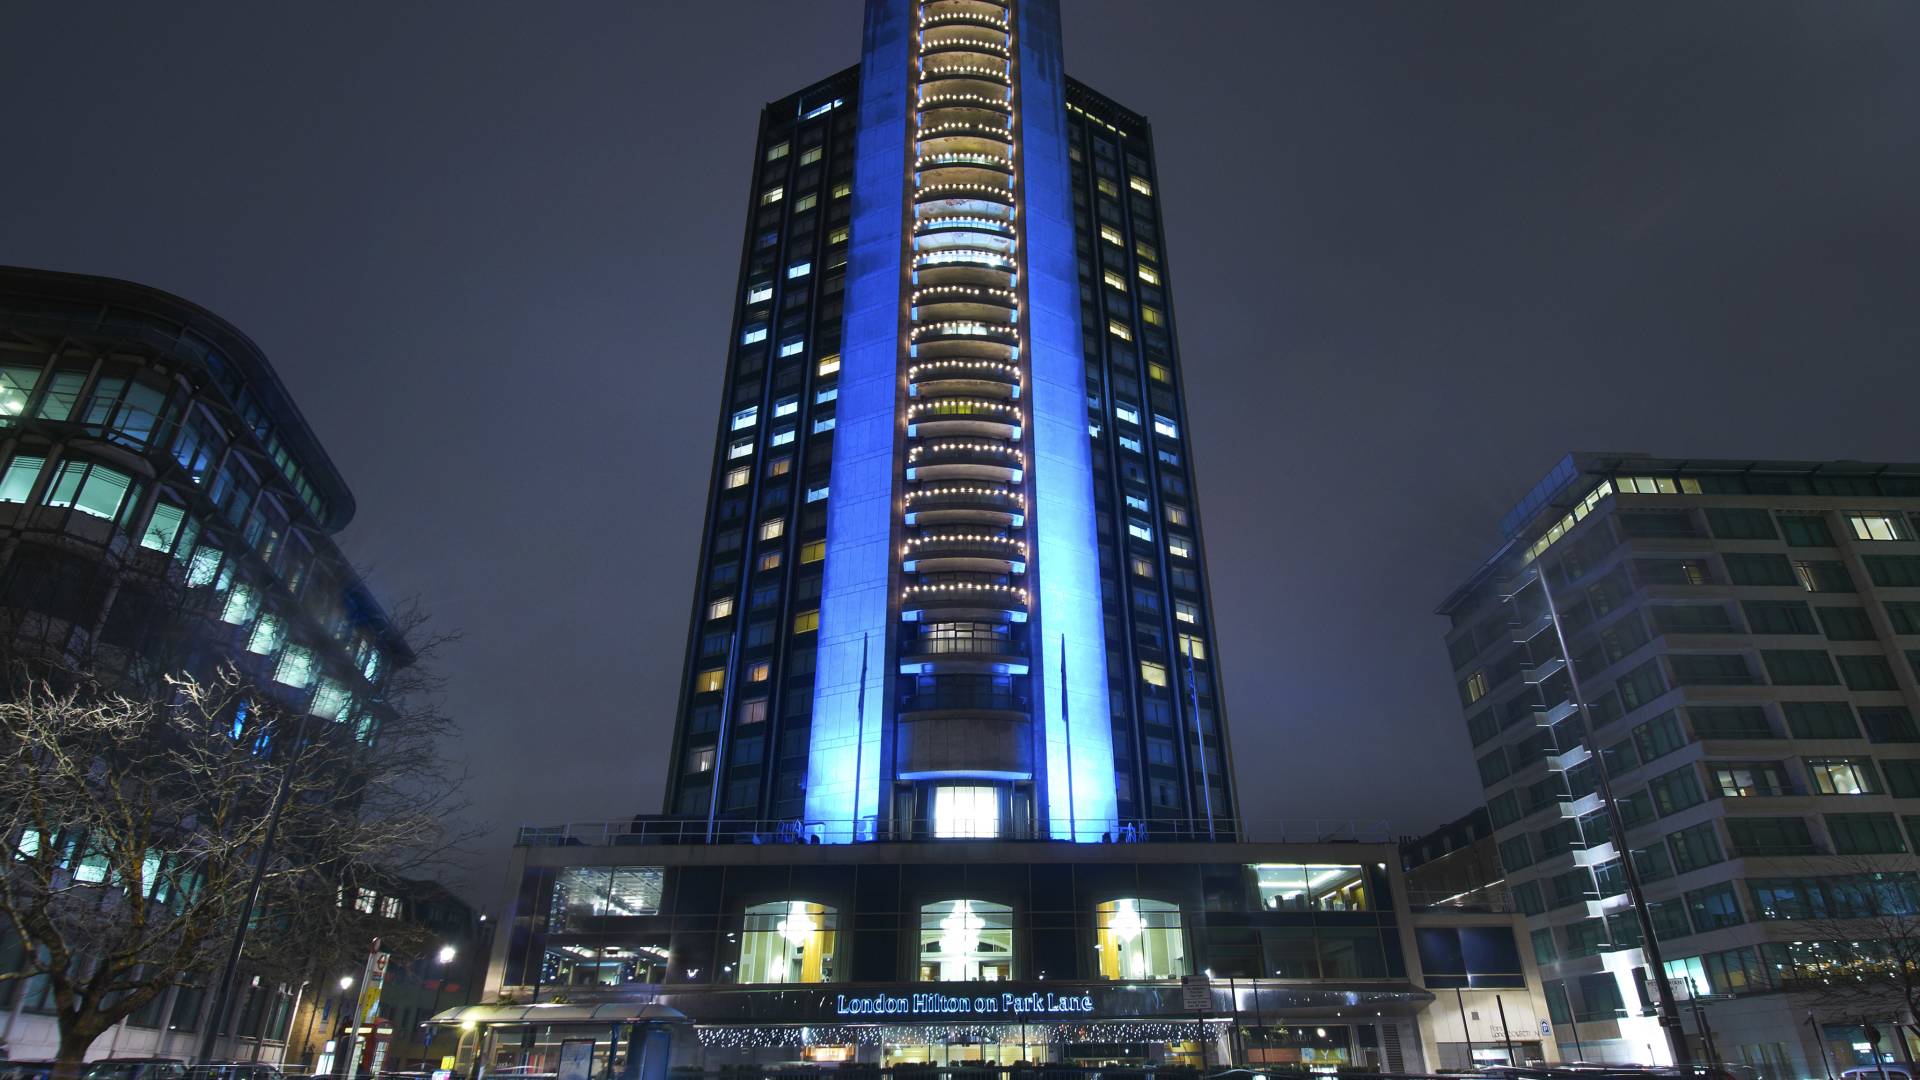 High Rise Hotel Exterior at Night